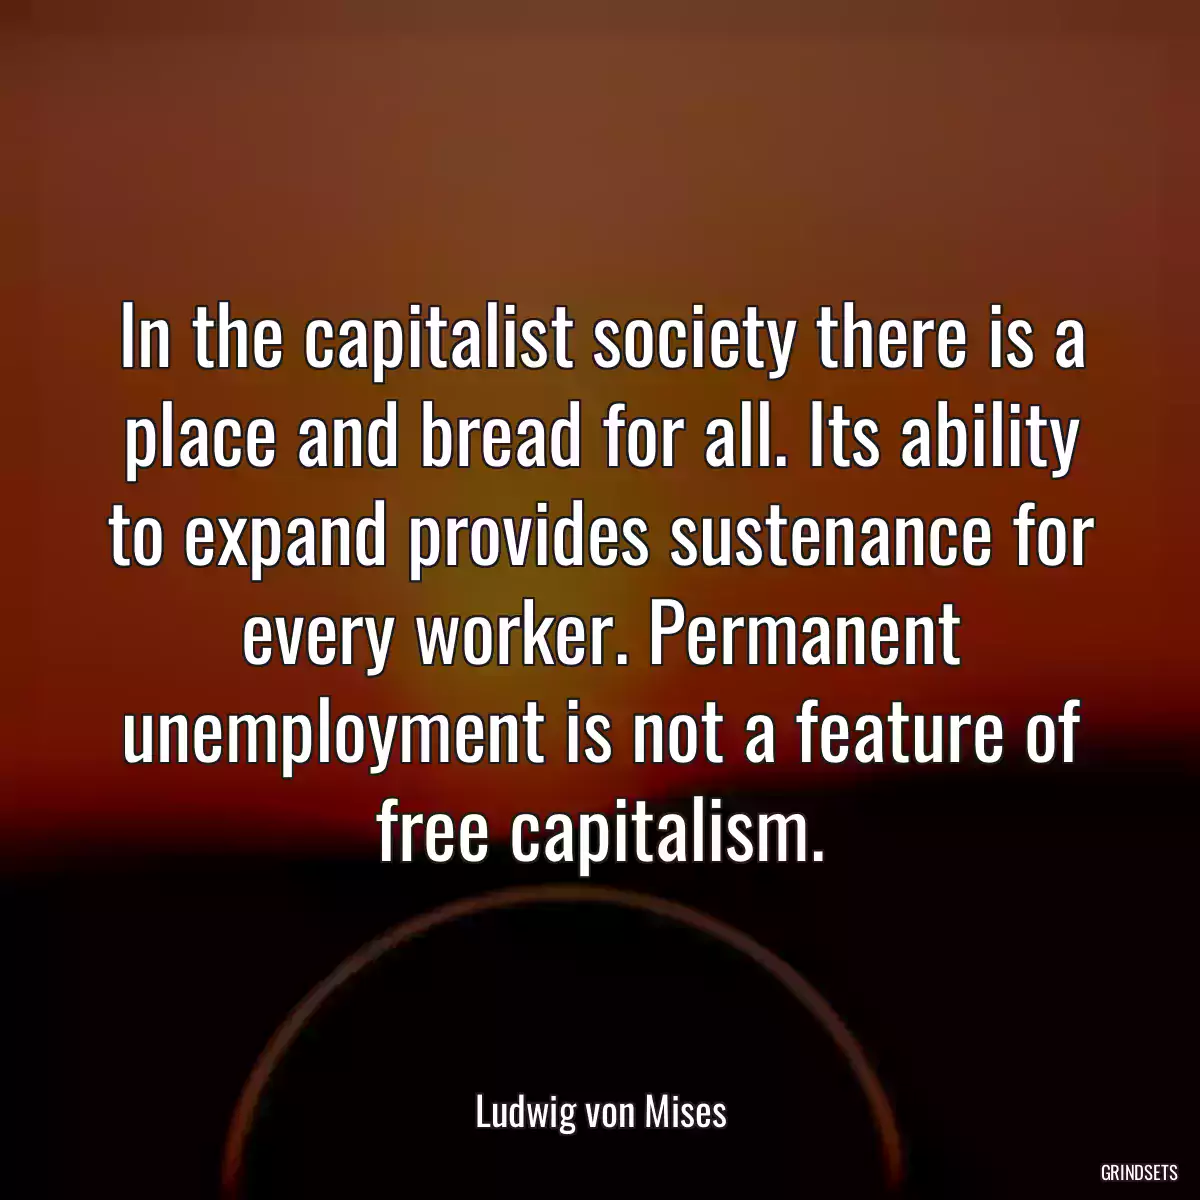 In the capitalist society there is a place and bread for all. Its ability to expand provides sustenance for every worker. Permanent unemployment is not a feature of free capitalism.